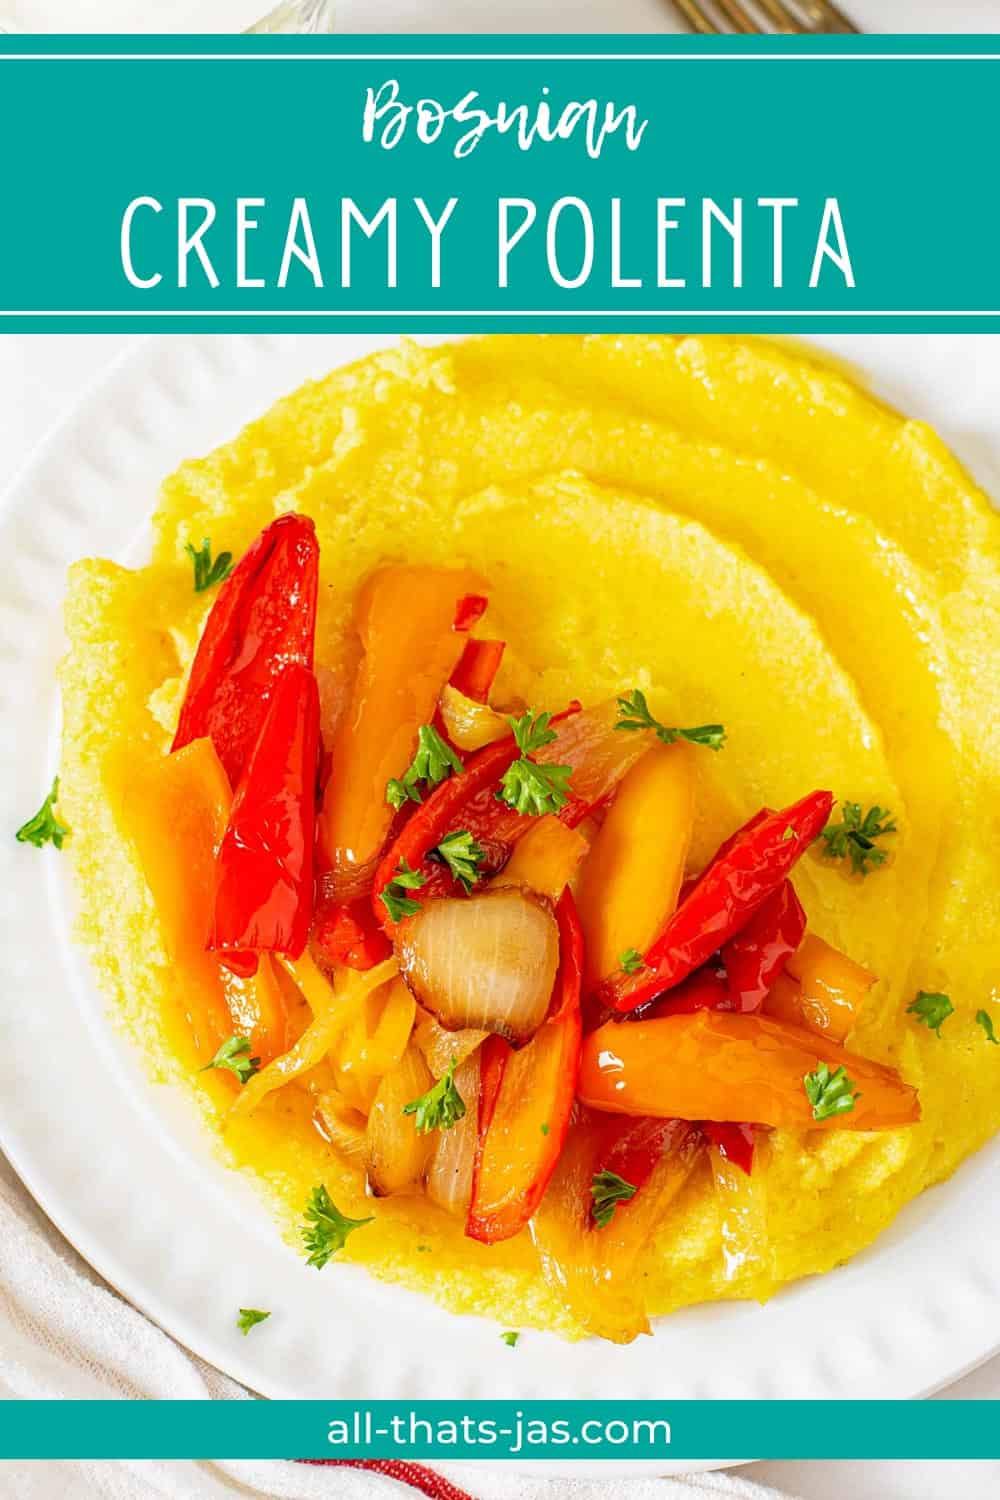 Sauteed peppers and onions over smooth polenta with text overlay.